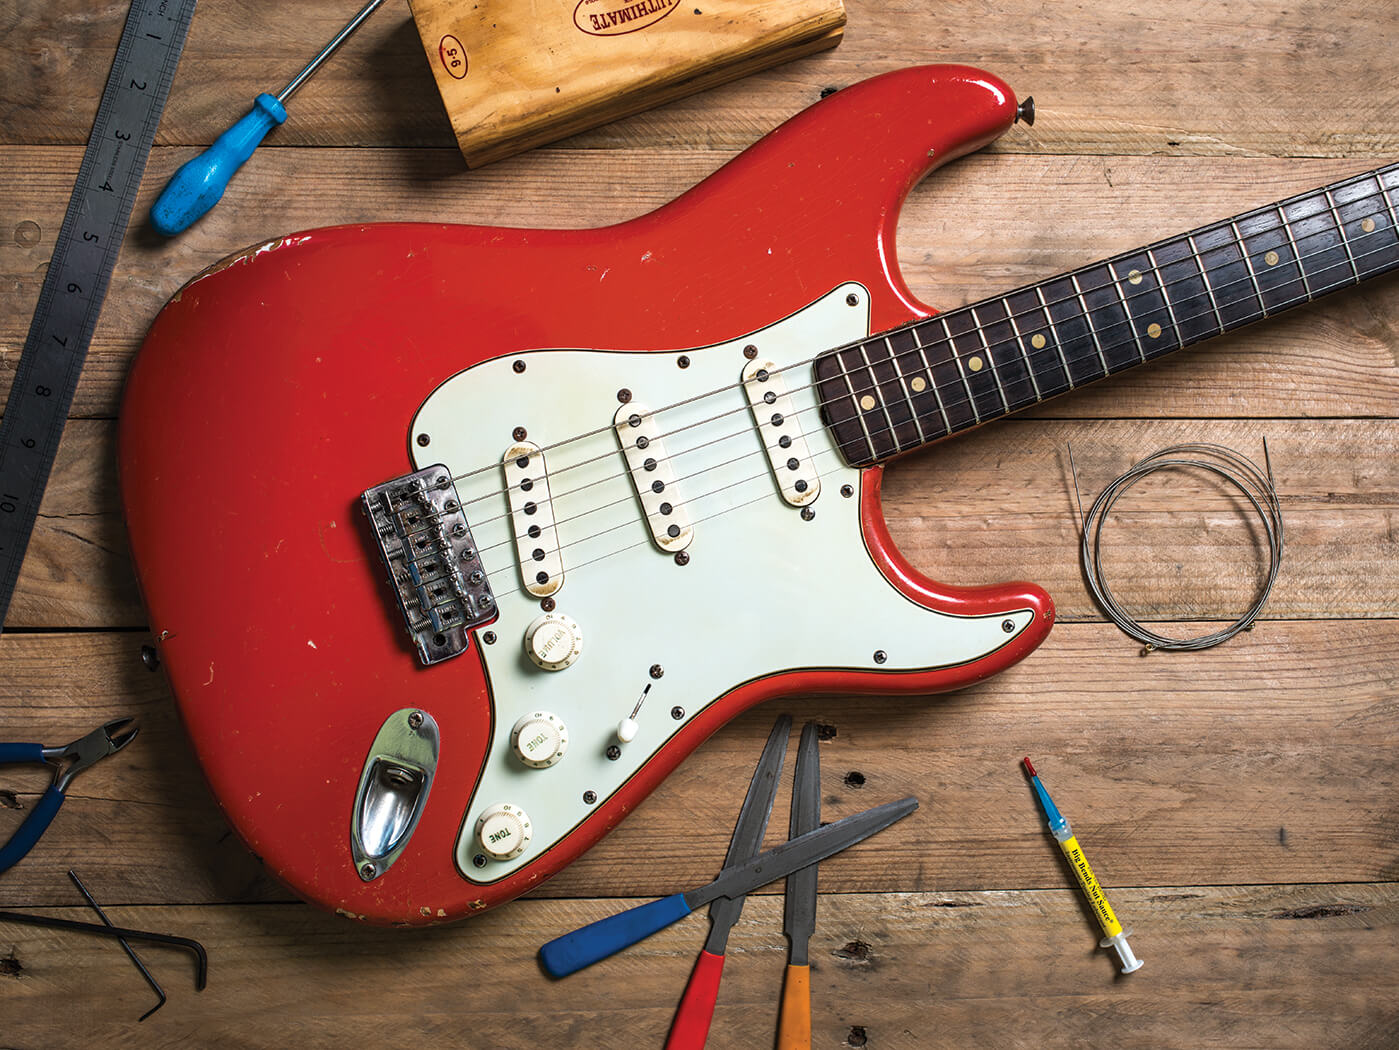 How Thick Is a Stratocaster Body?